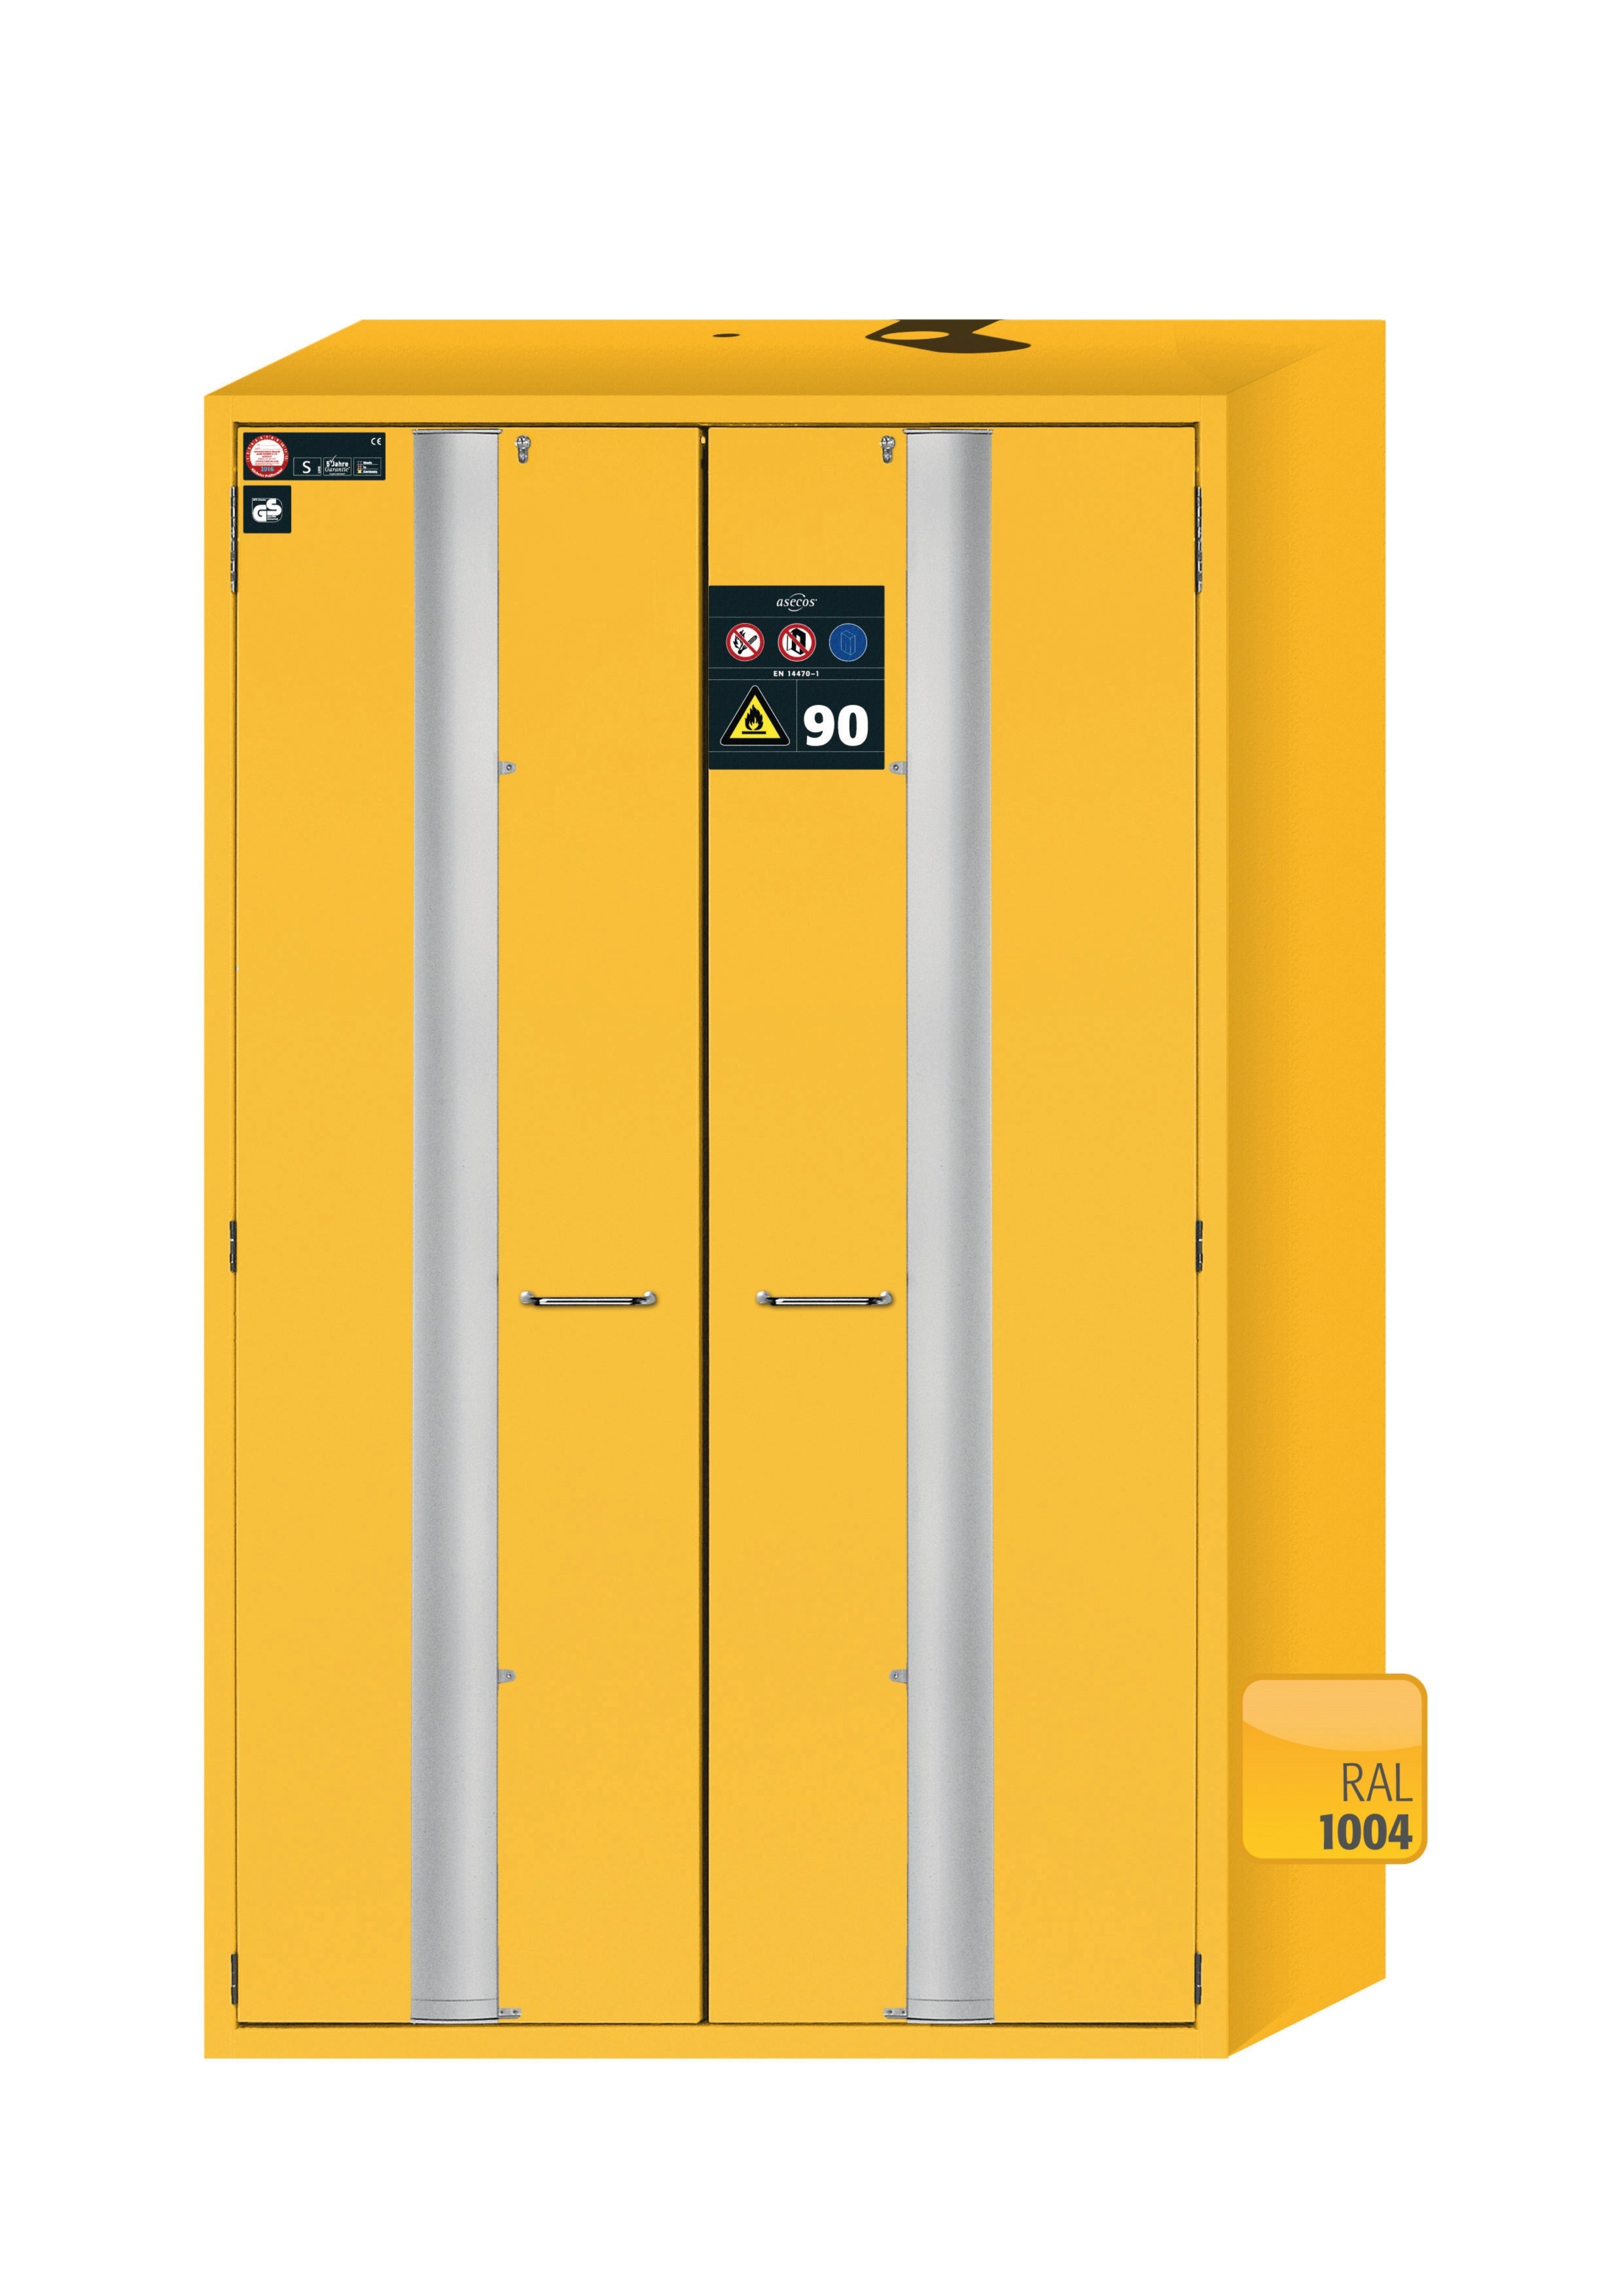 Type 90 safety storage cabinet S-PHOENIX-90 model S90.196.120.FDAS in warning yellow RAL 1004 with 2x drawer (standard) (stainless steel 1.4301),